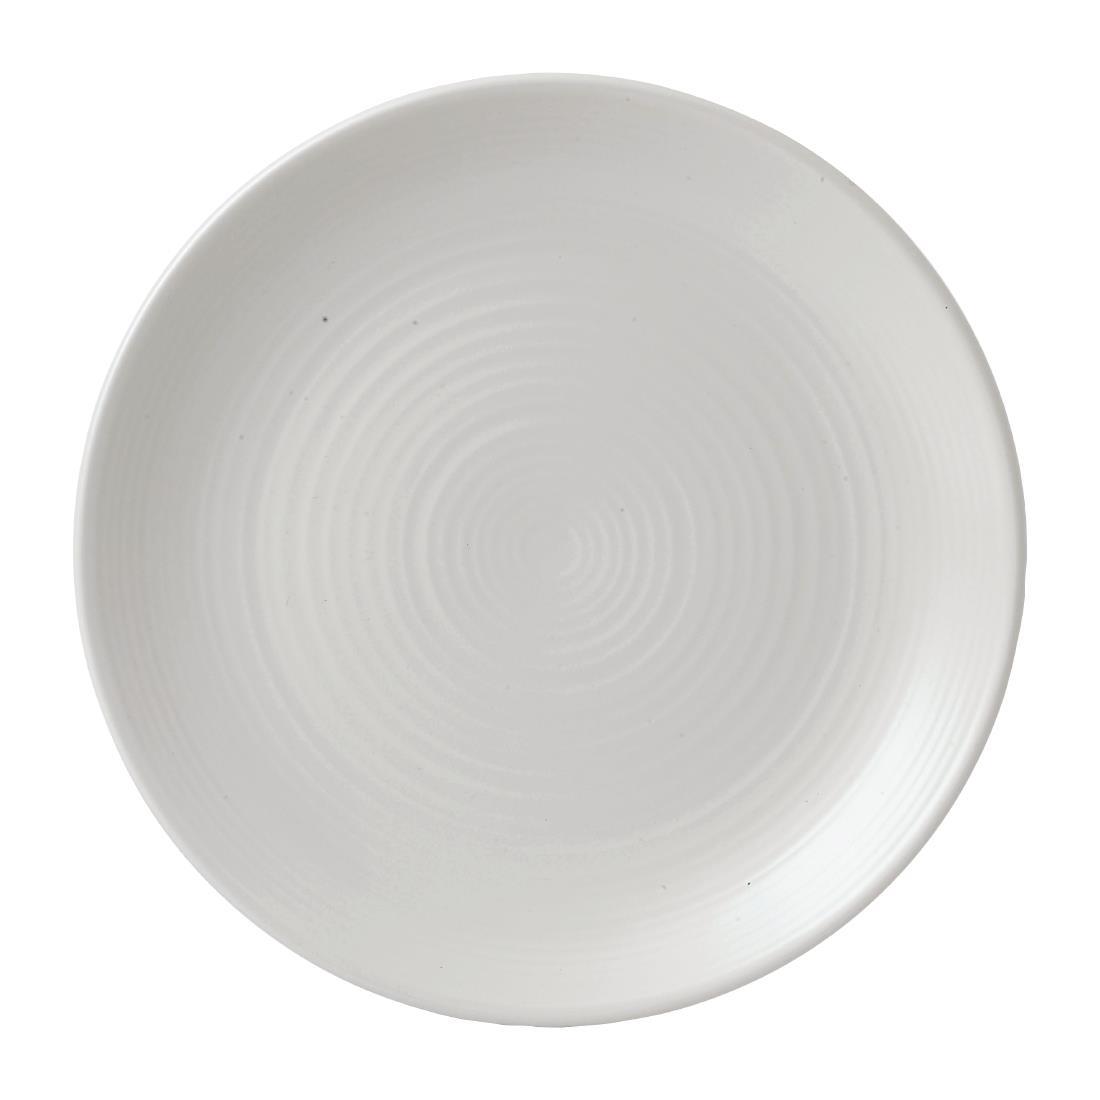 Dudson Evo Pearl Coupe Plate 295mm (Pack of 6) - FE340  - 1